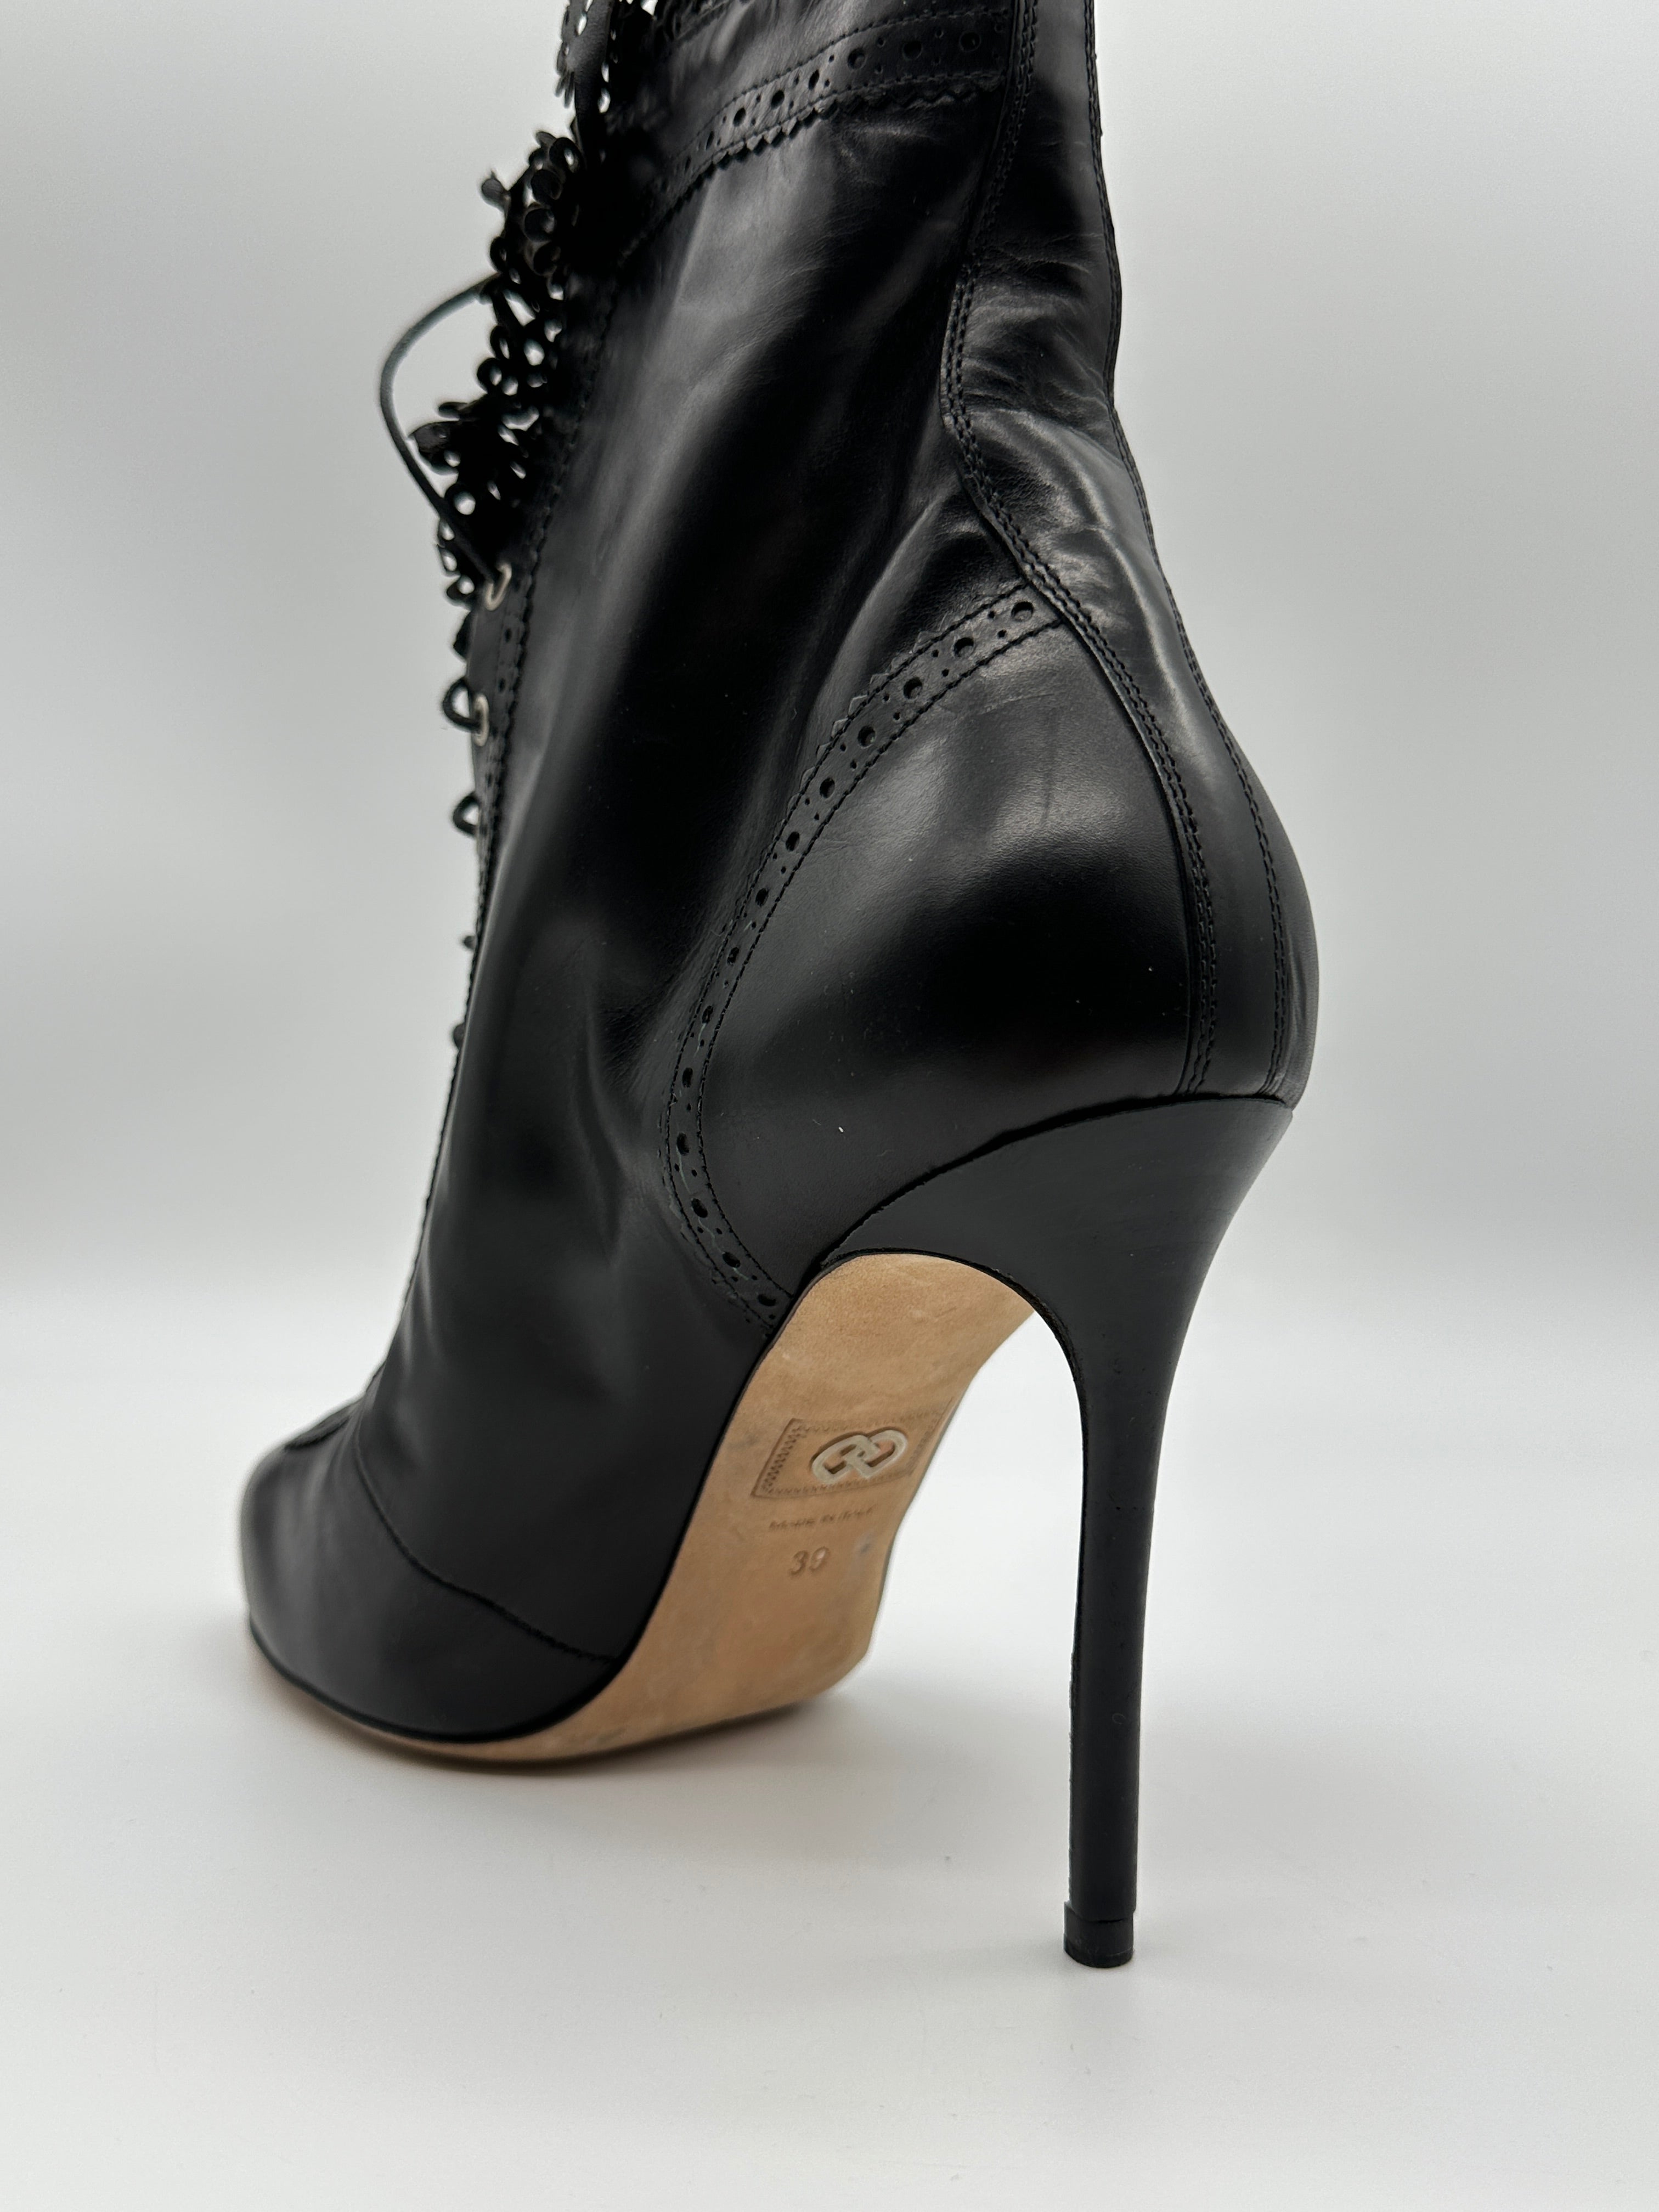 Ankle Boots Stiletto Heels